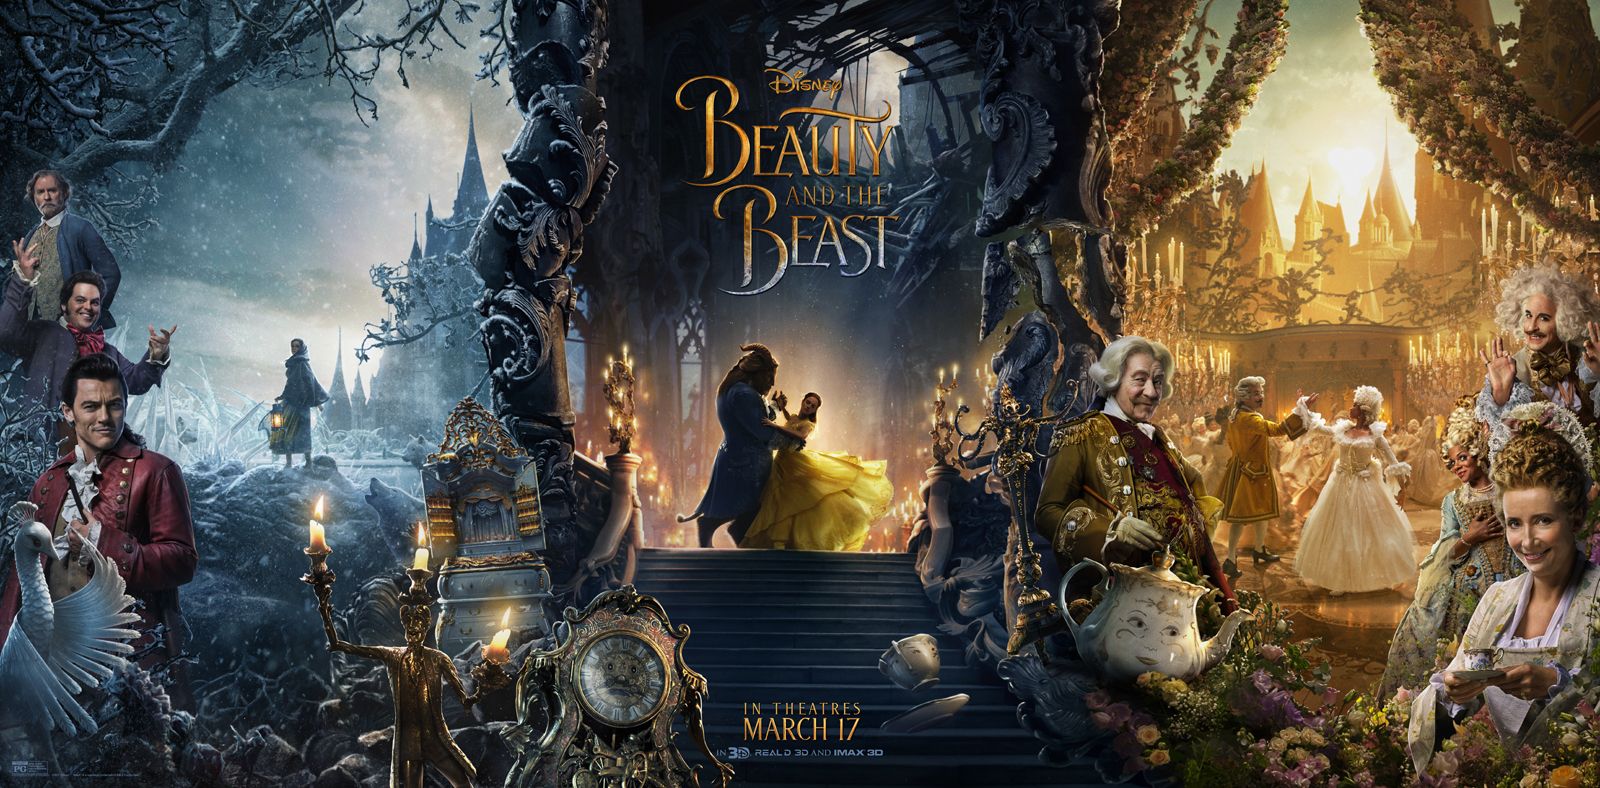 Today only through 2pm EST! Buy one, get one Beauty and the Beast movie tickets + $5 off